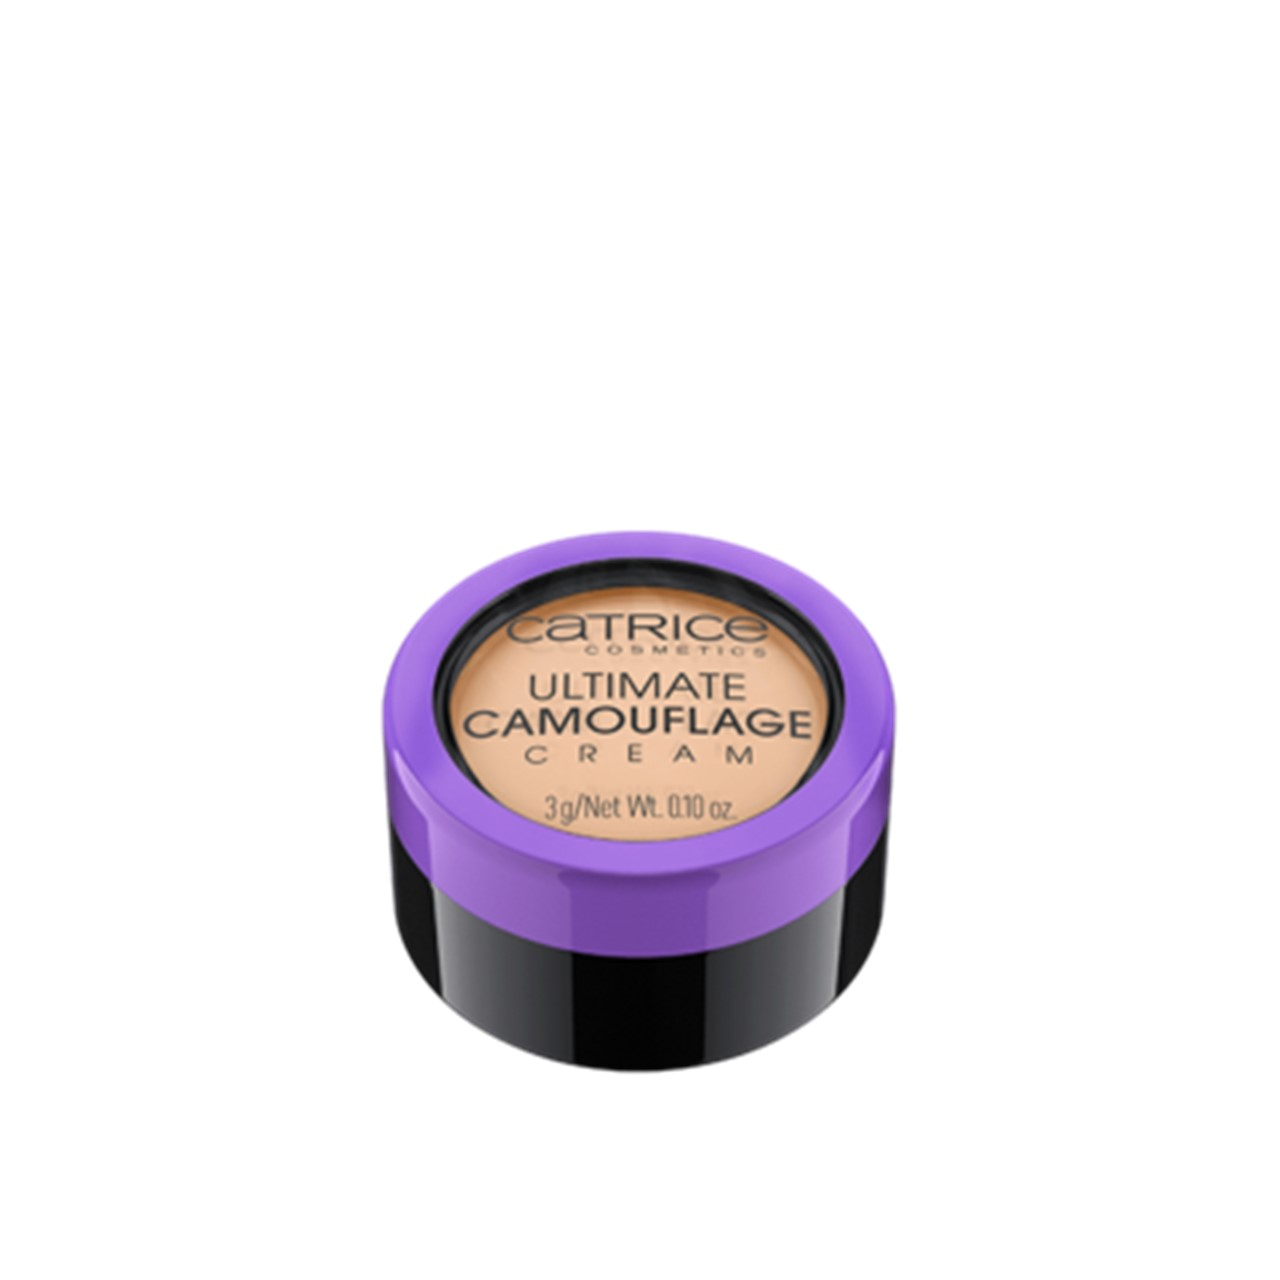 Buy Catrice Ultimate Camouflage Cream 015 W Fair 3g · Greenland